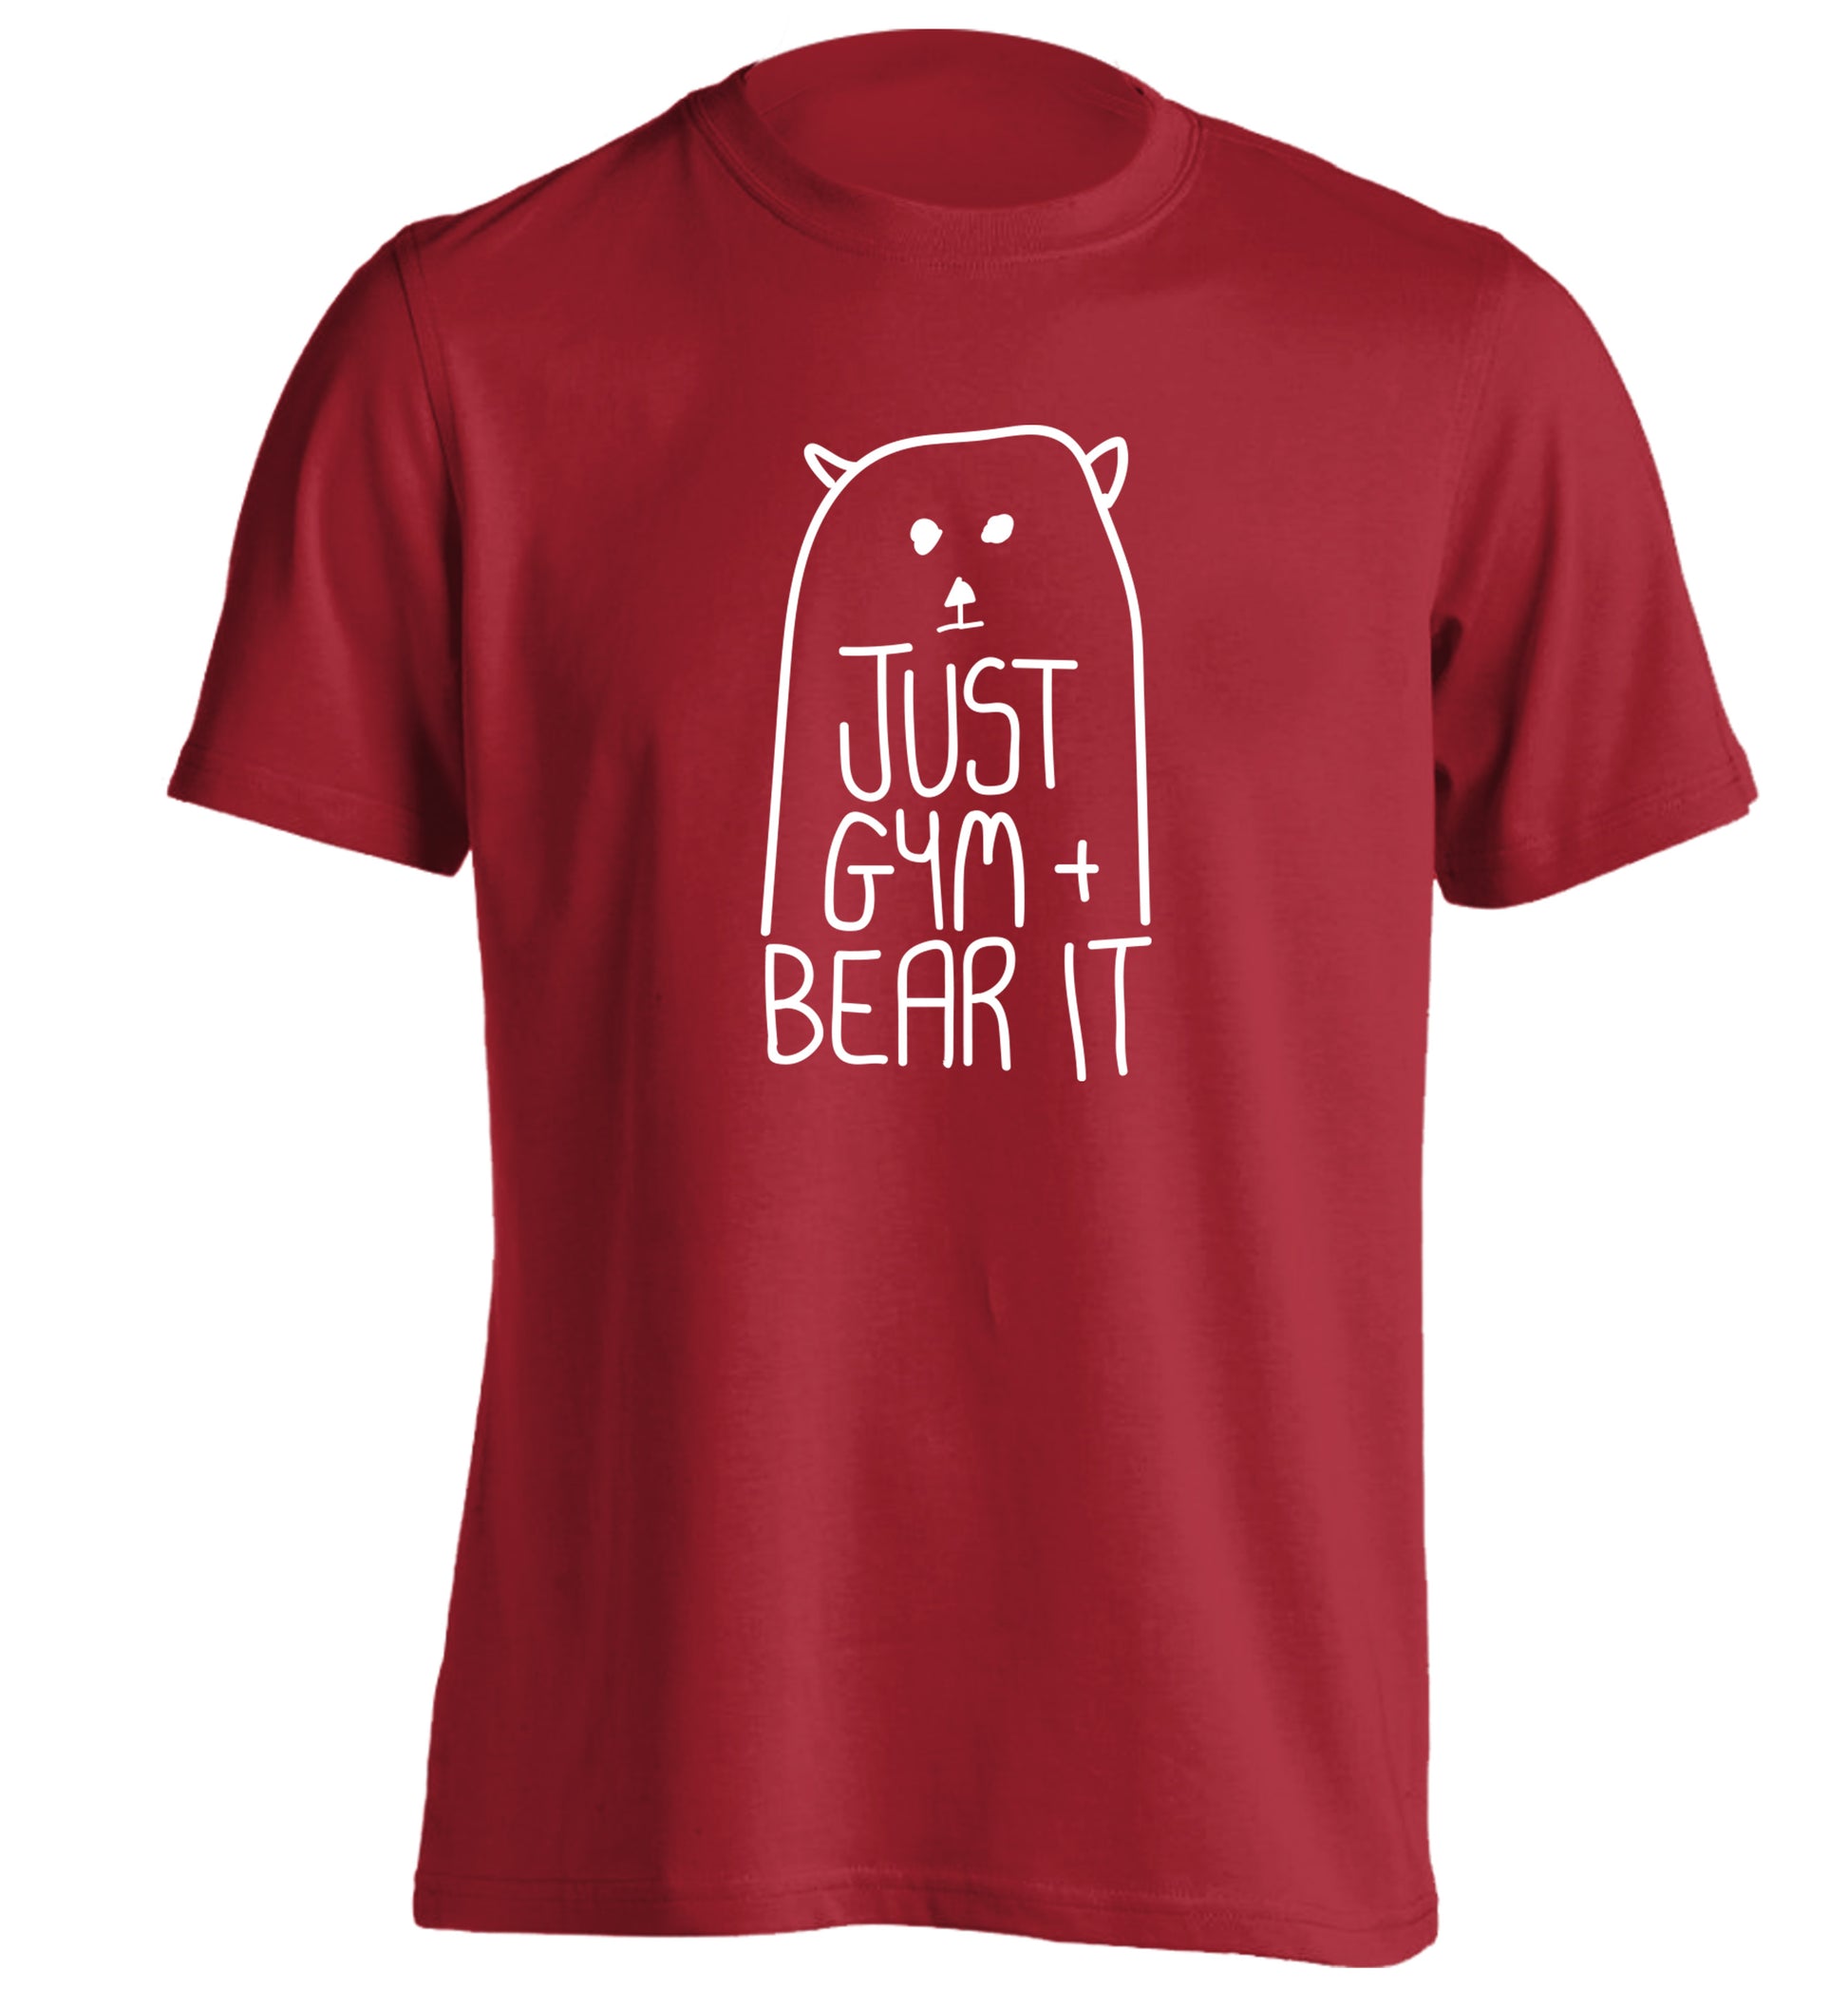 Just gym and bear it adults unisex red Tshirt 2XL